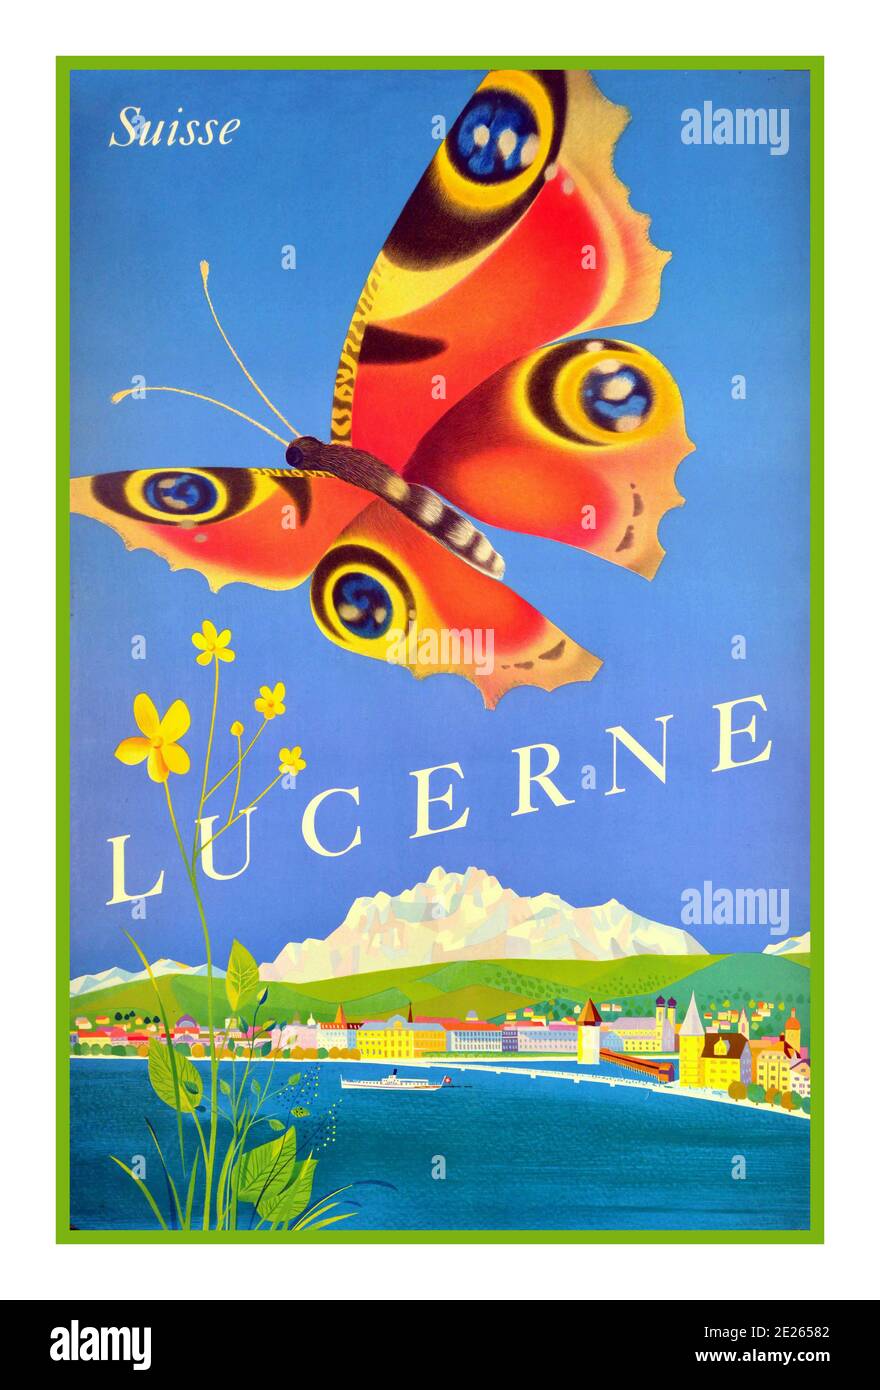 LUCERNE 1950's vintage travel poster for Lucerne Switzerland with a butterfly in the sky and lake and city in the background. Lucerne is a city in central Switzerland, in the German-speaking portion of the country. Lucerne the capital of canton of Lucerne. Owing to its location on the shores of Lake Lucerne (German: Vierwaldstattersee) and its outflow, the river Reuss, within sight of the mounts Pilatus and Rigi in the Swiss Alps, Lucerne has long been a destination for tourists.: Switzerland designer: Schmidlin & Magoni 1956 Stock Photo